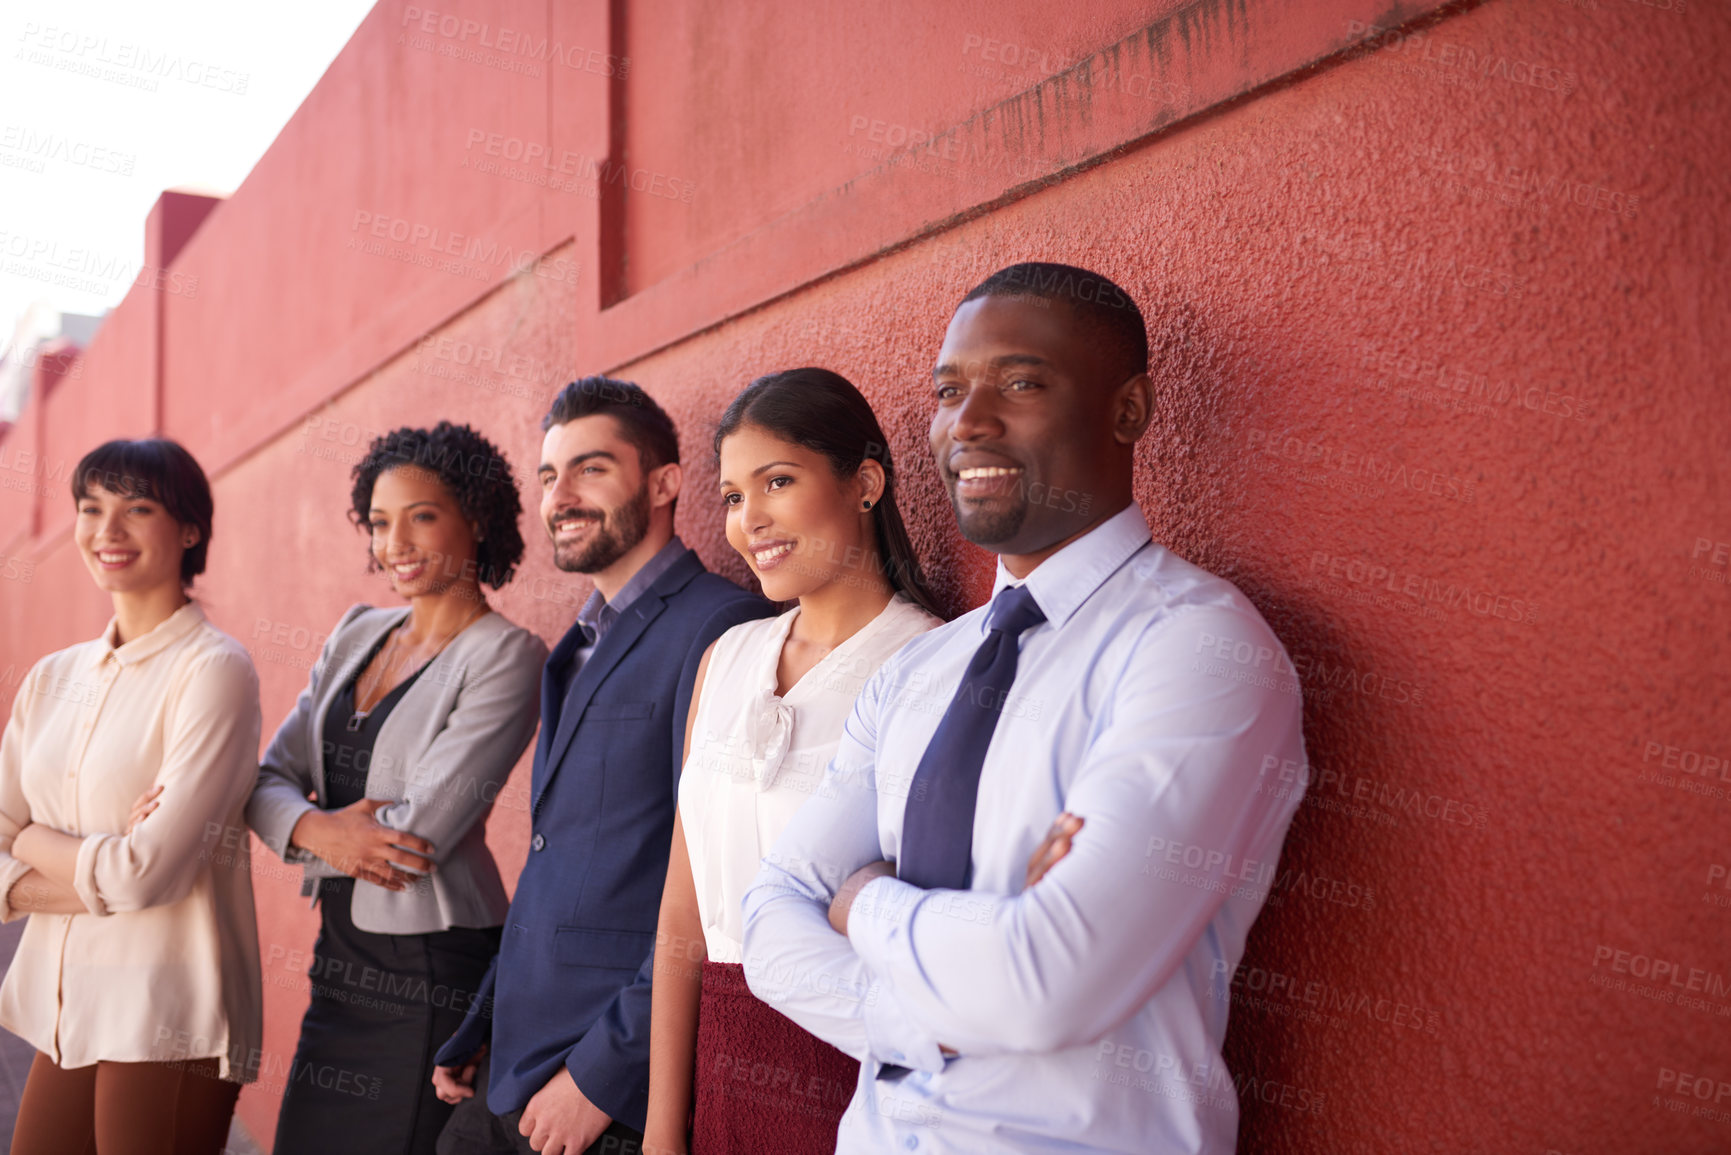 Buy stock photo Shot of a group of businesspeople standing against a red wall outdoors